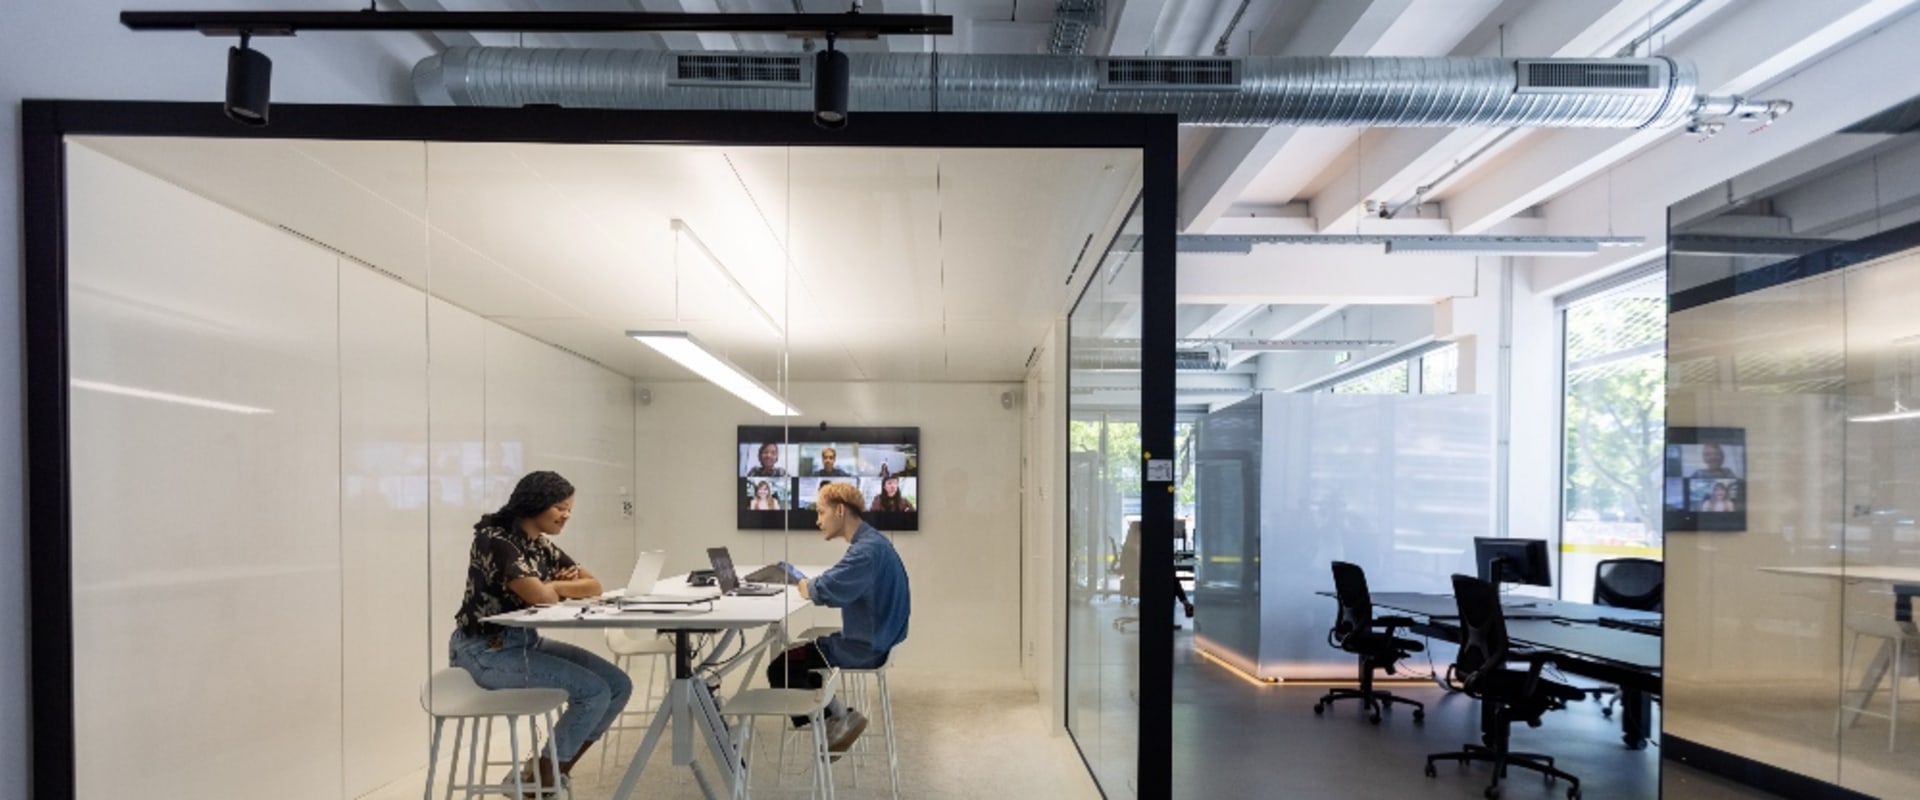 How much space should each person have in an office?